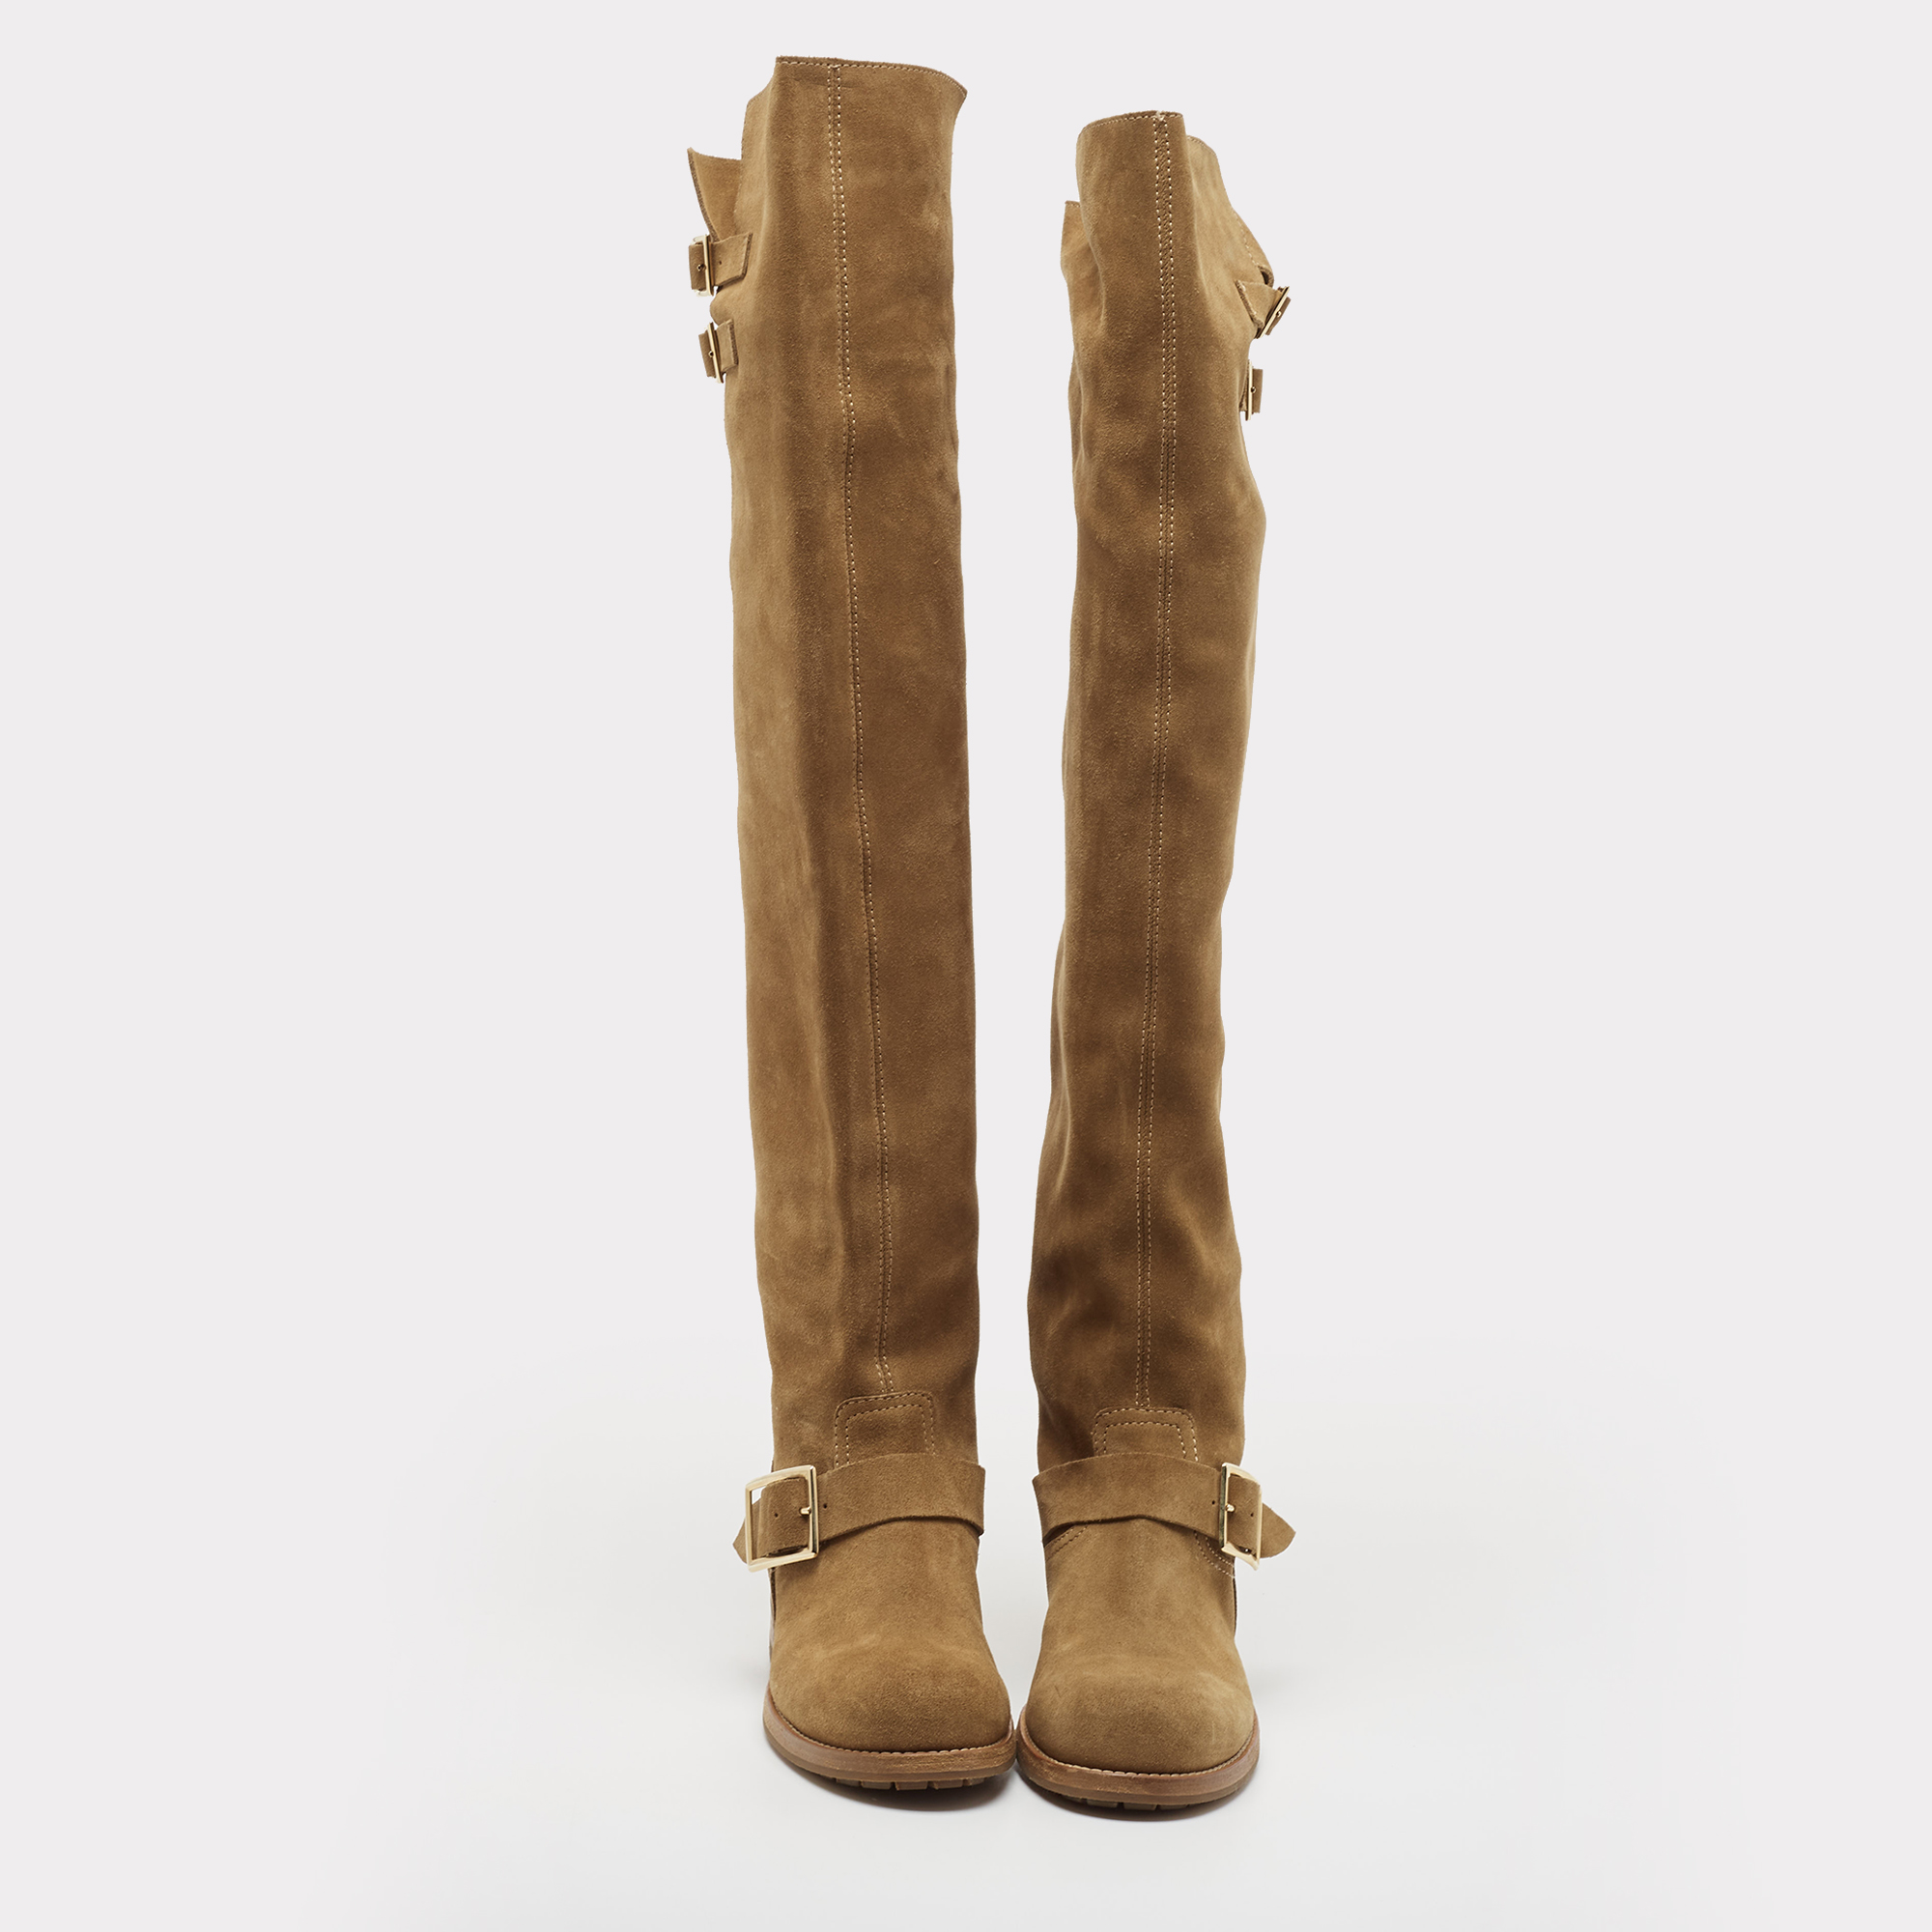 Jimmy Choo Brown Suede Yearn Buckle Over The Knee Boots Size 36